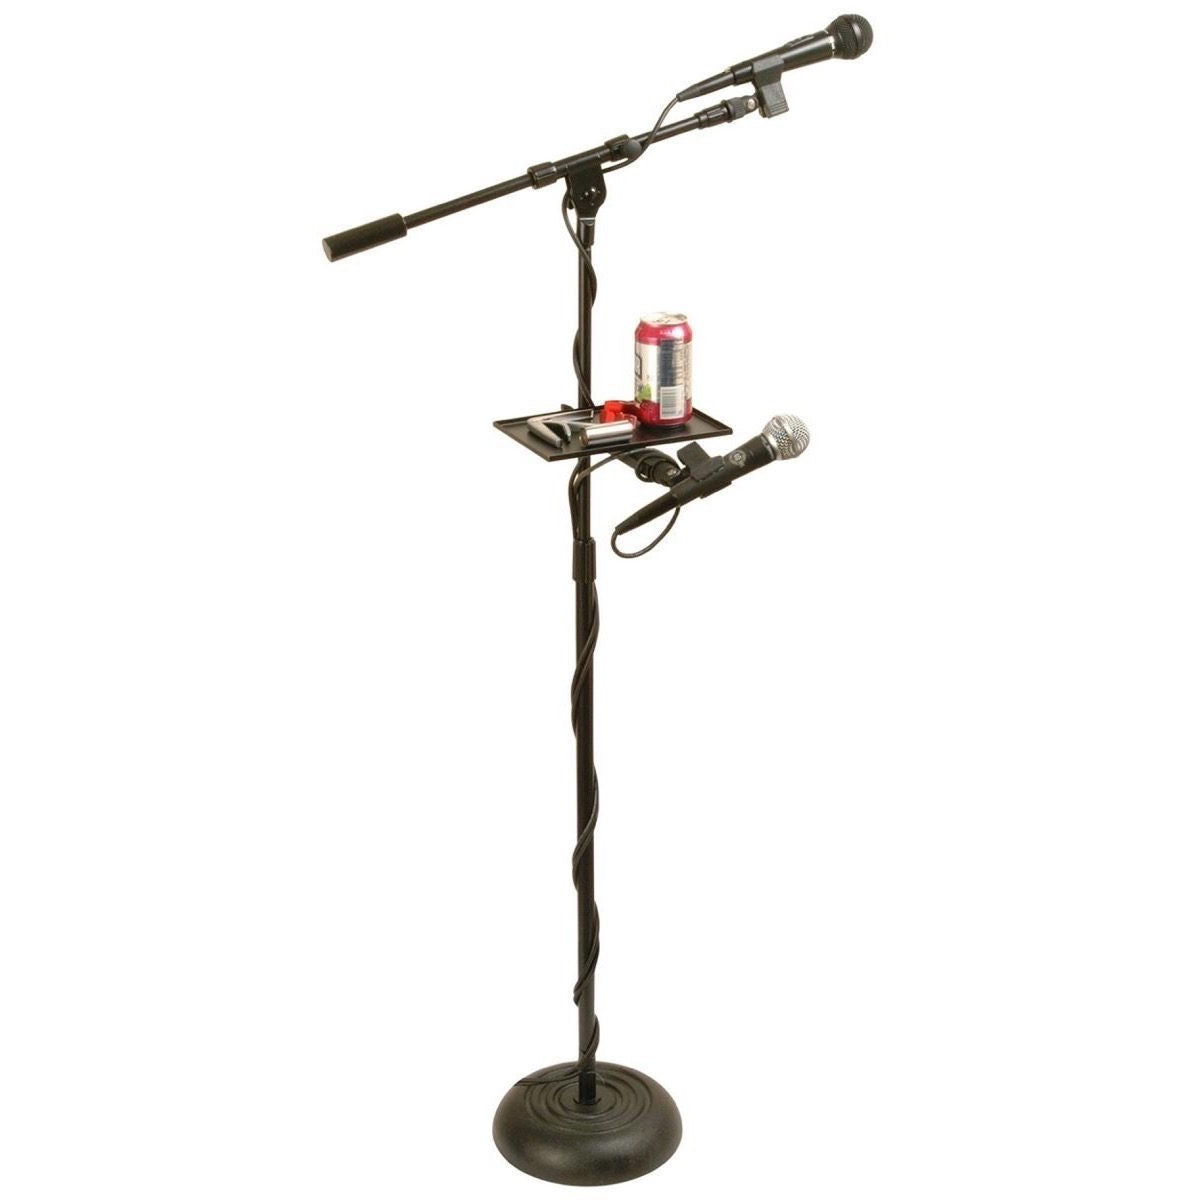 On-Stage MST1000 U-mount Microphone Stand Tray